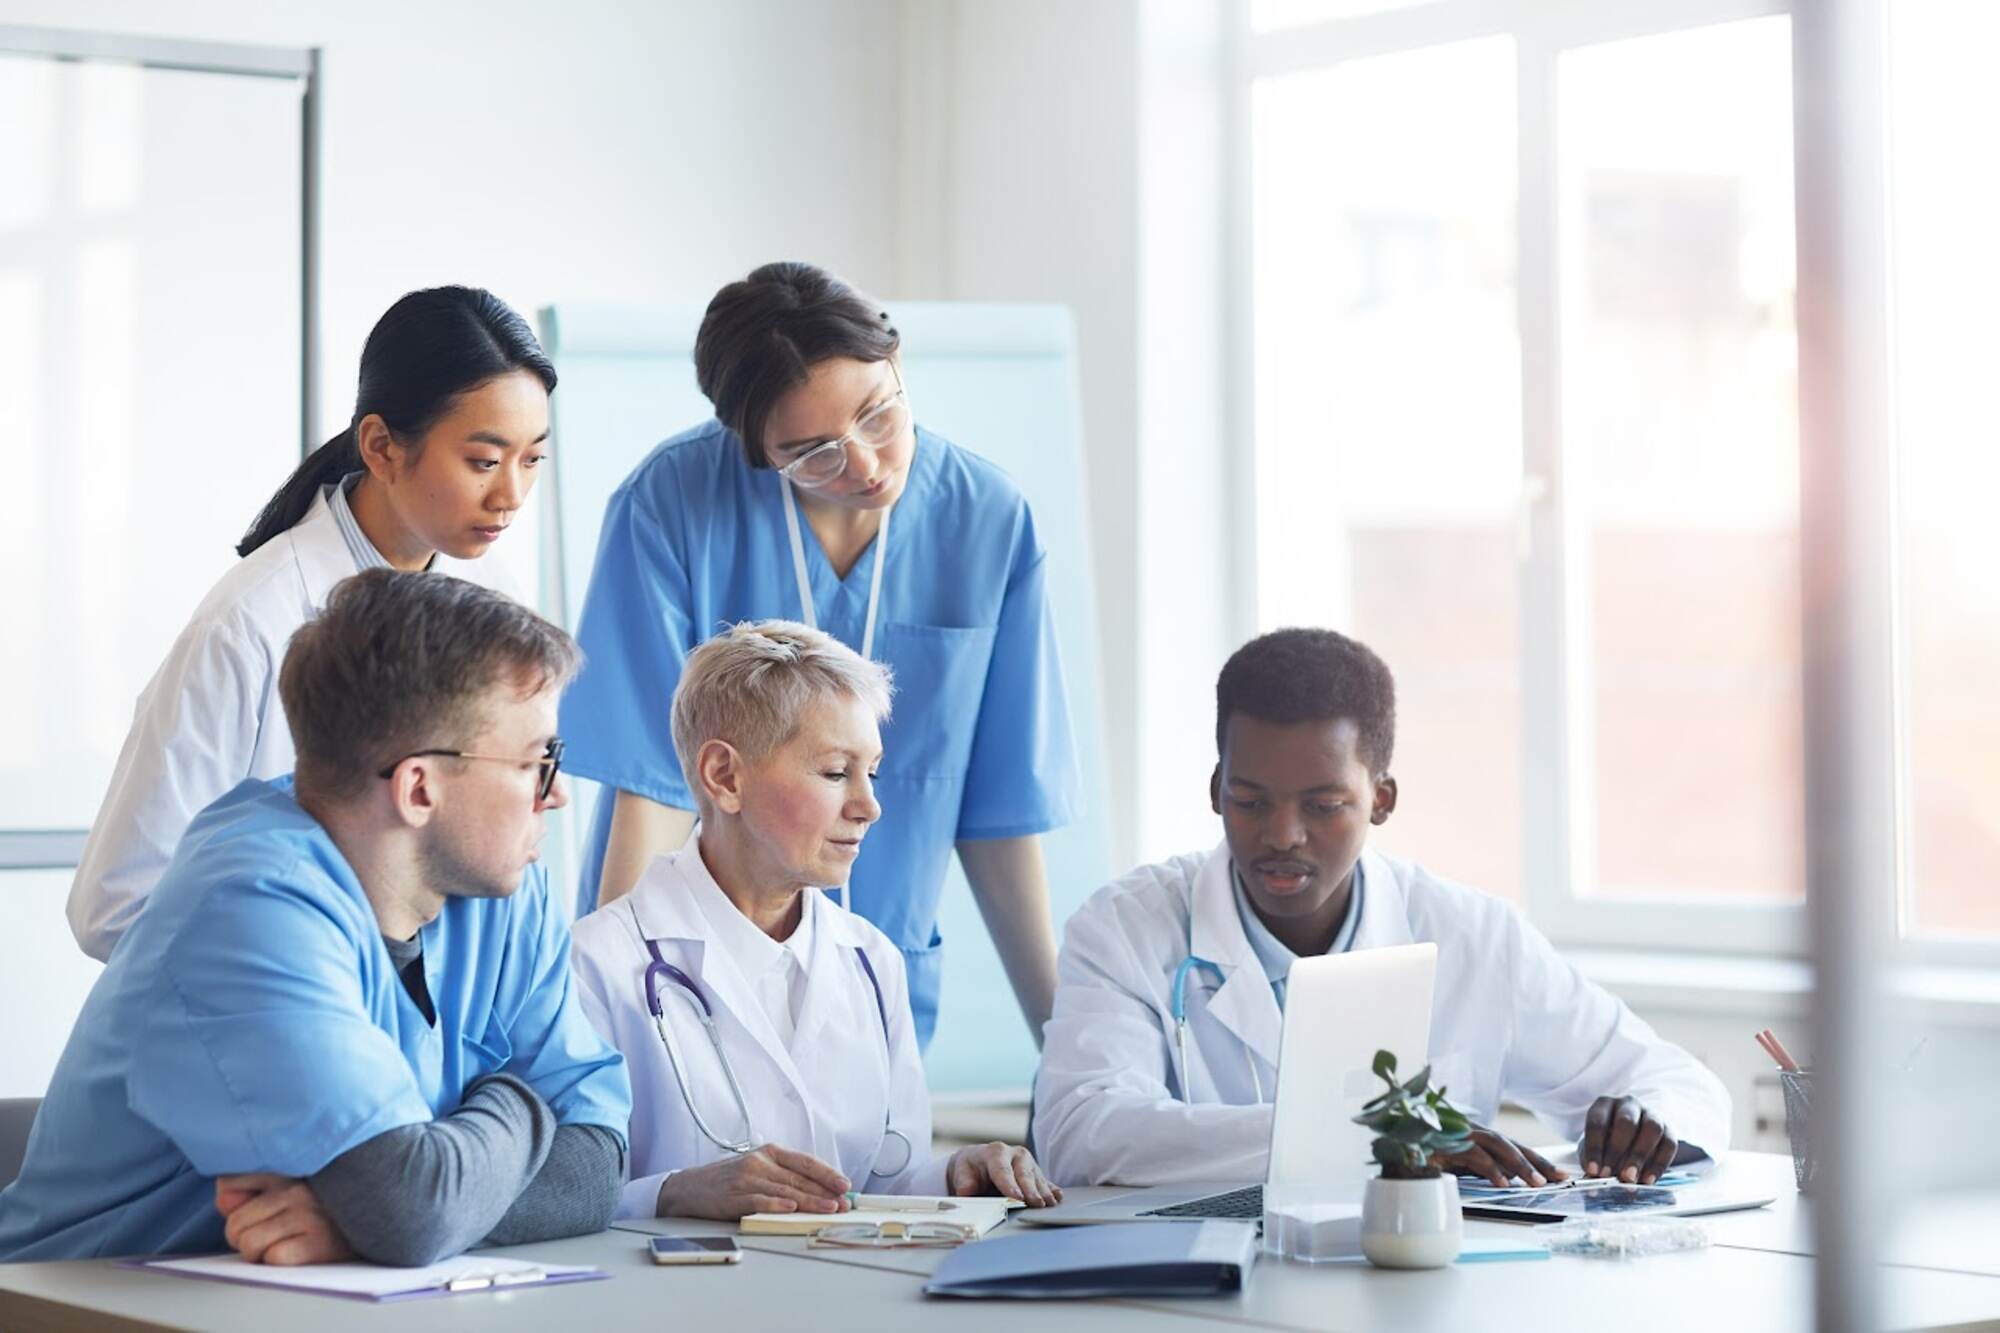 Free education opportunities available for healthcare workers in the USA